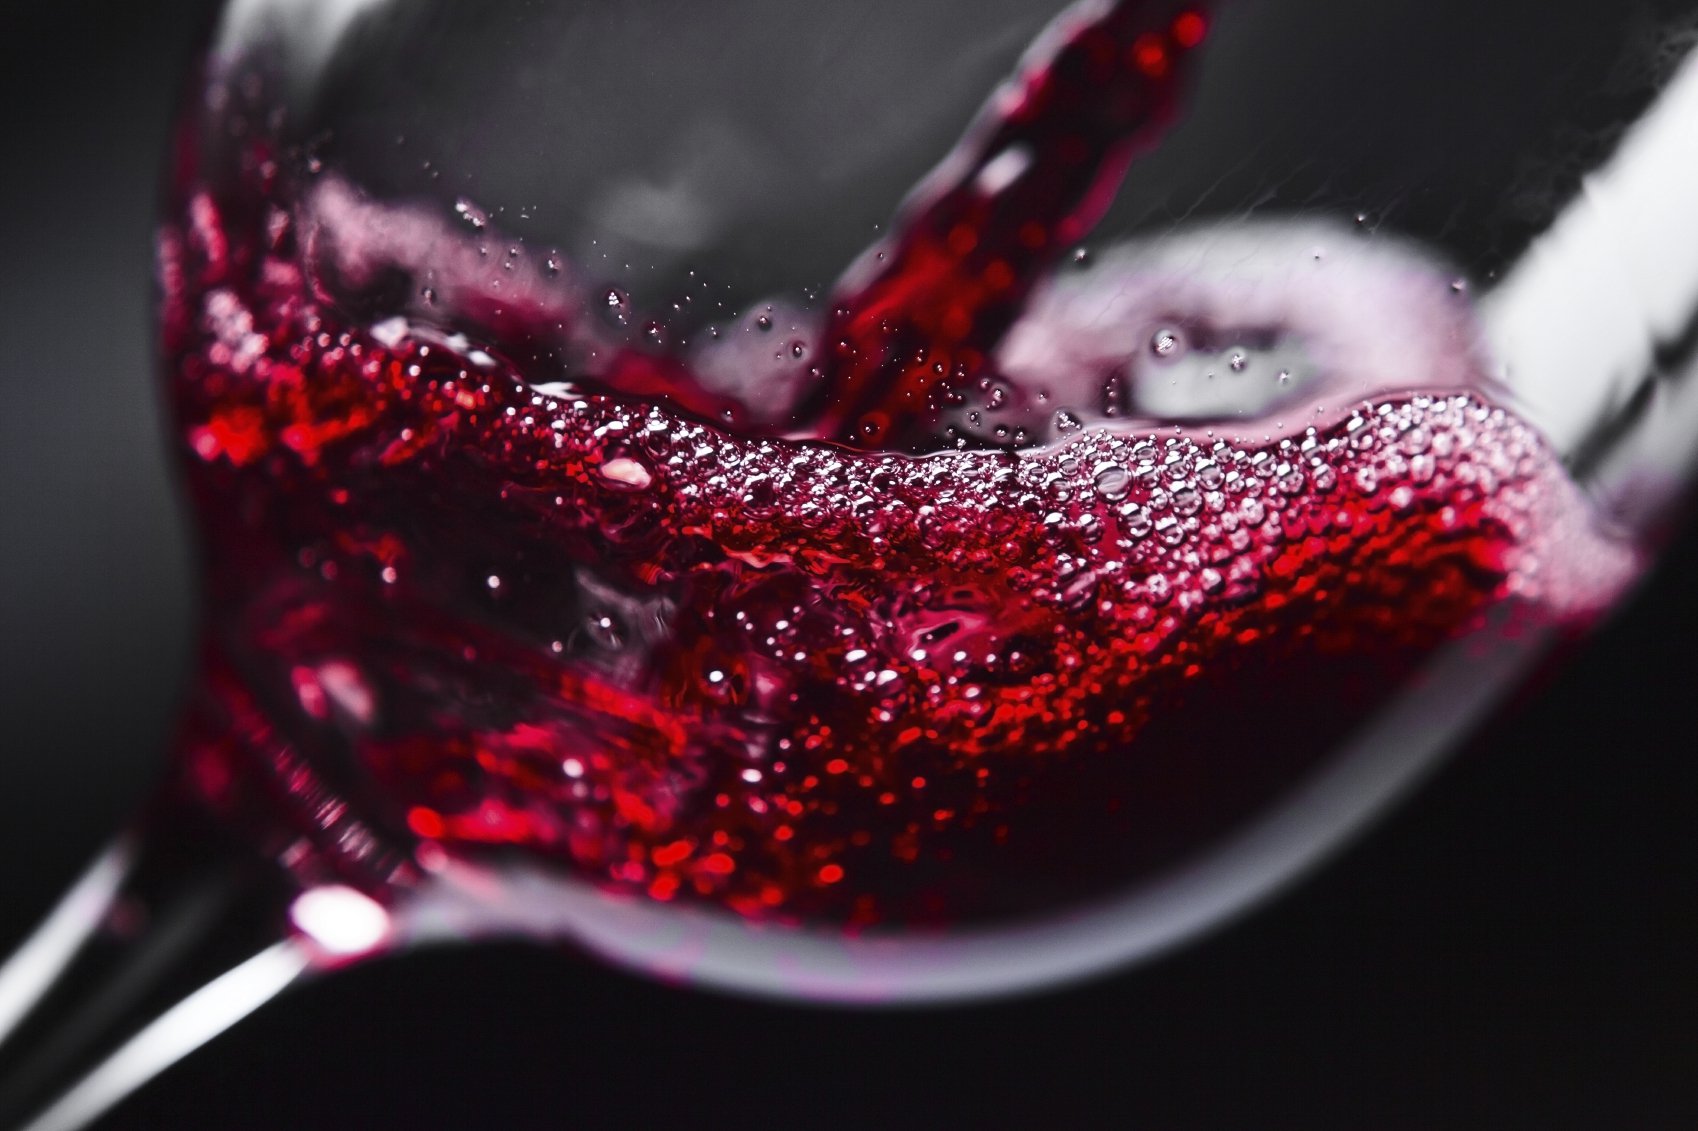 Red wine can prevent teeth and gum disease